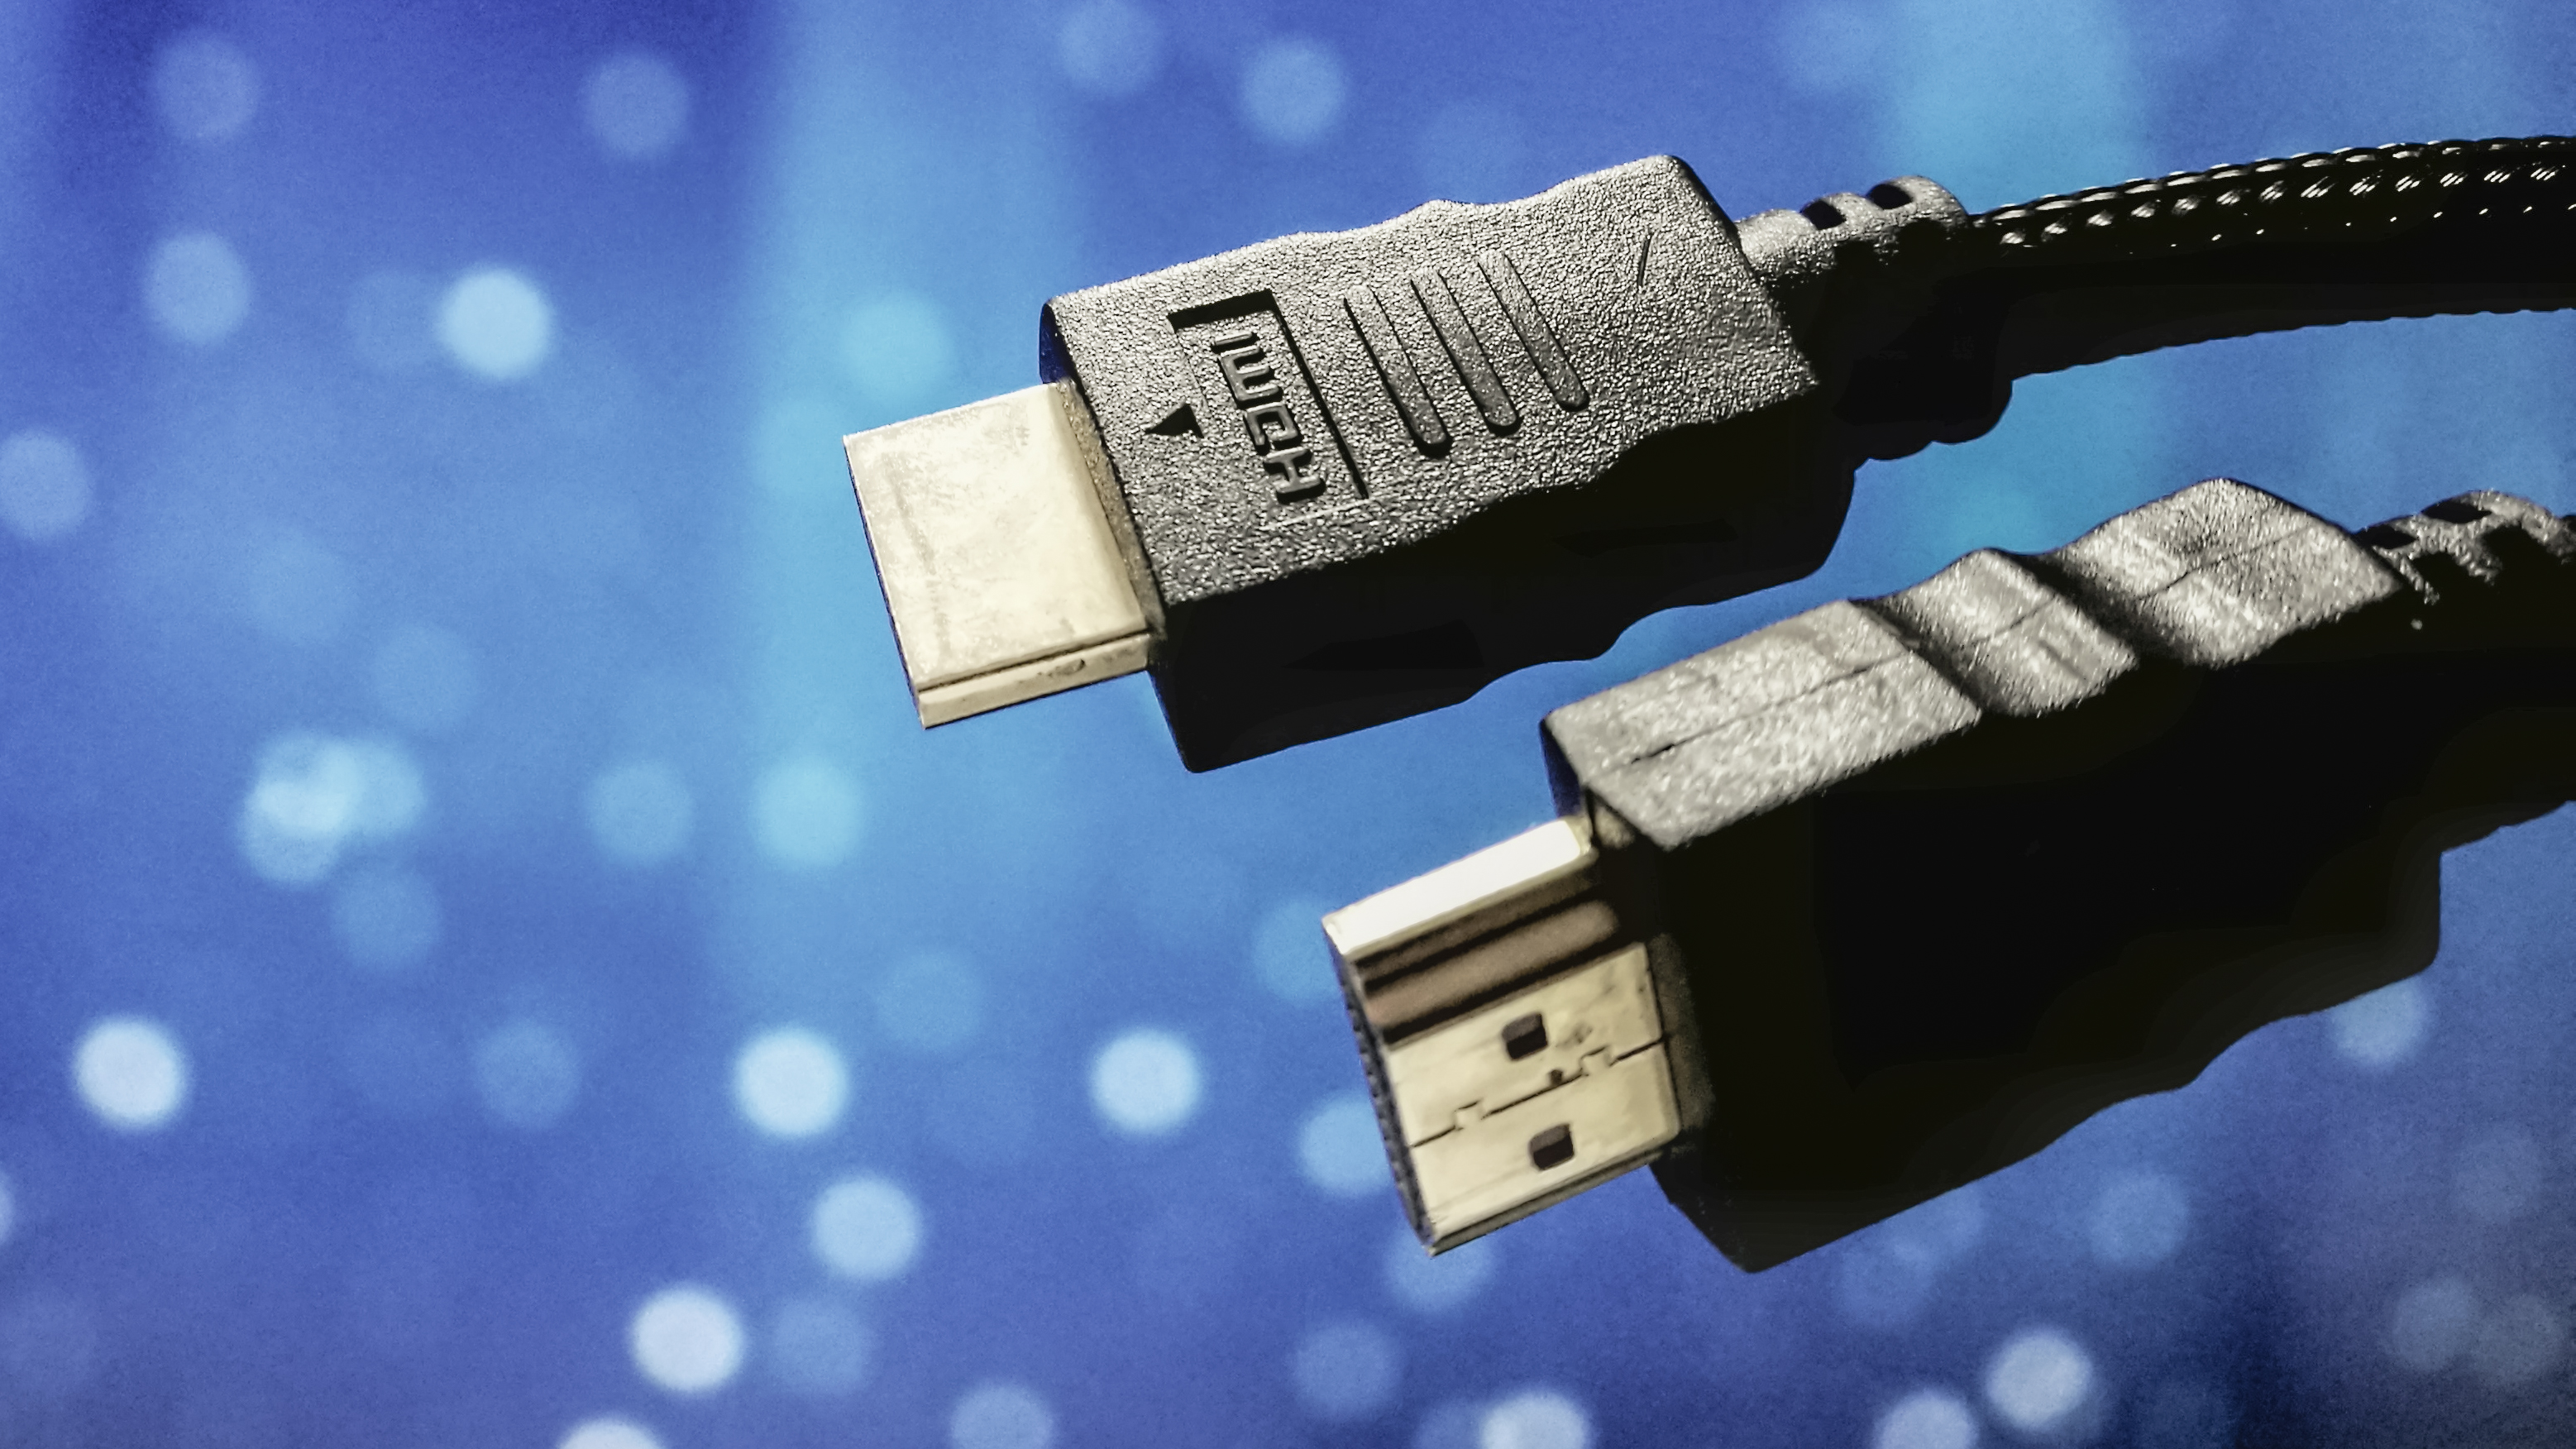 HDMI Mini and Micro Cables: What They Are, How They're Used